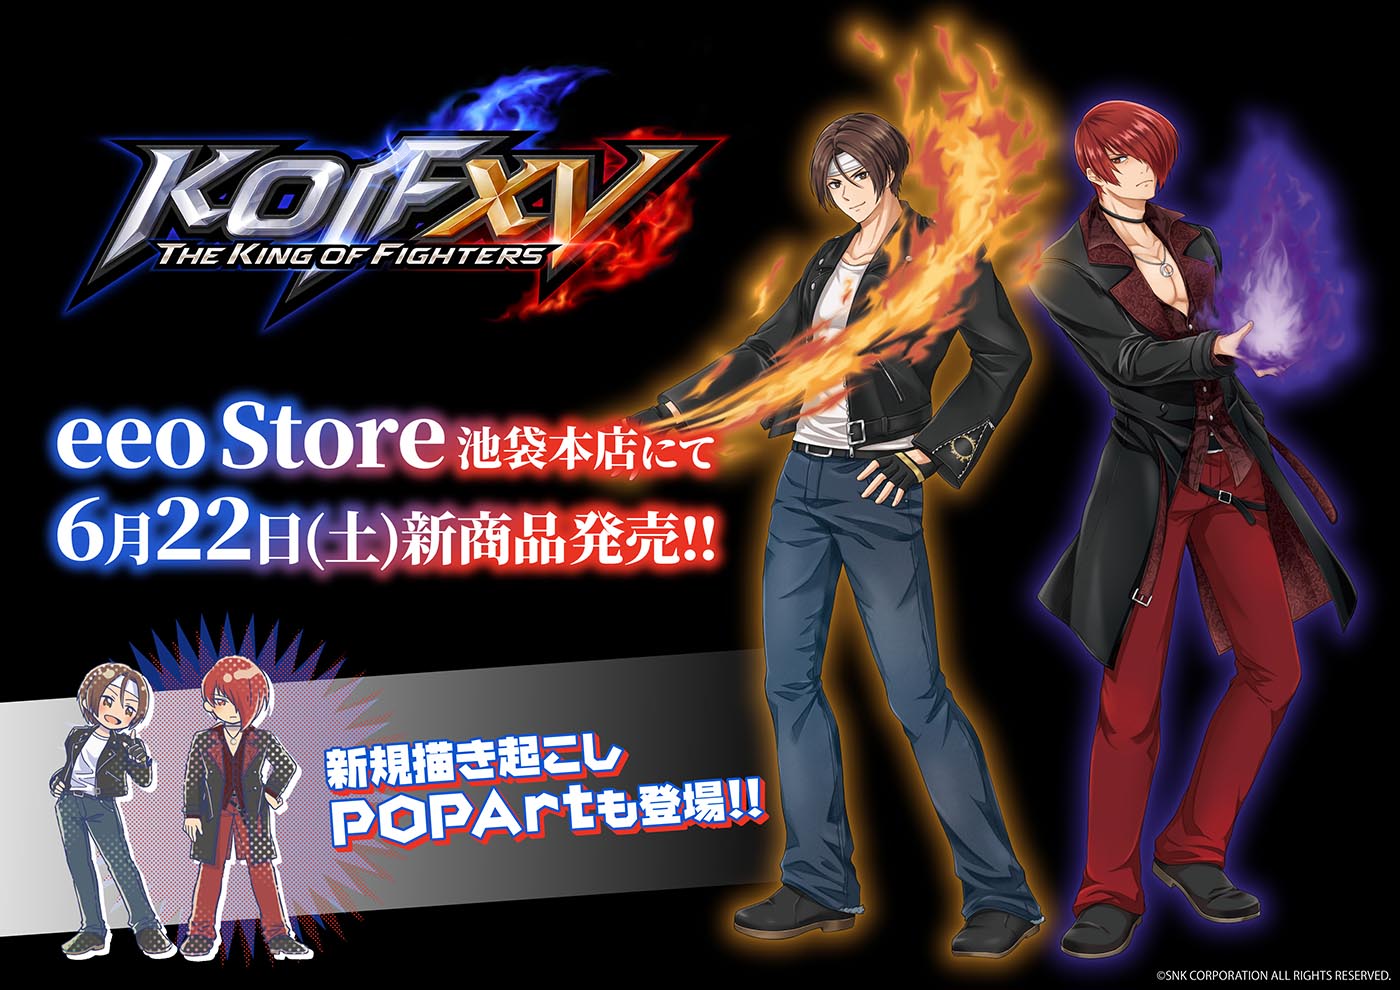 THE KING OF FIGHTERS XV』新作グッズが発売！ 2種類のイラストで「KOF 